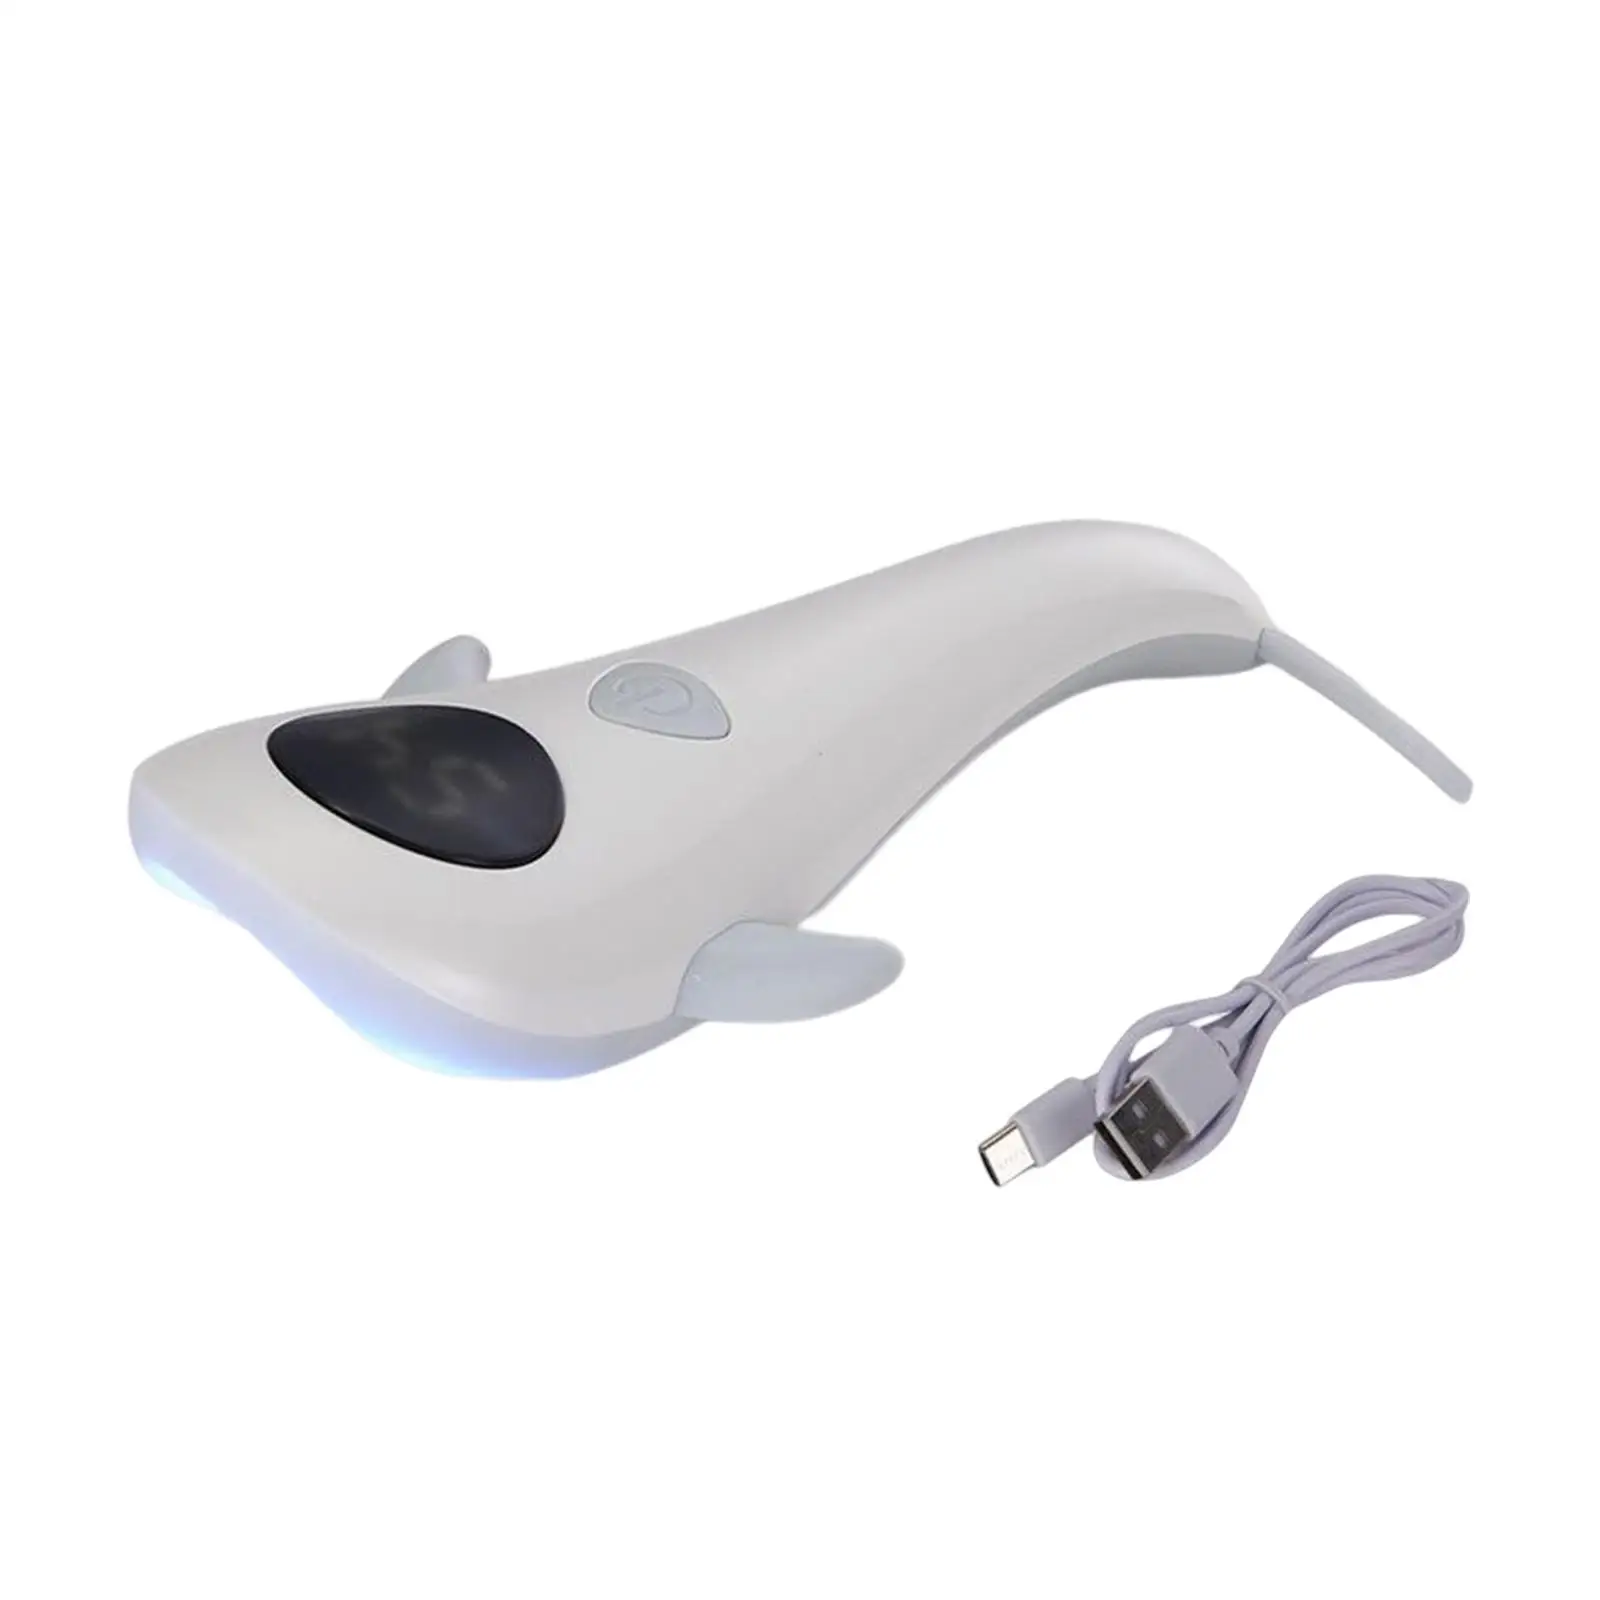 Professional Nail Lamp Salon and Home Use with 60S 90S 2 timers Digital Display Manicure Use C Quick Drying Handheld Nail Dryer